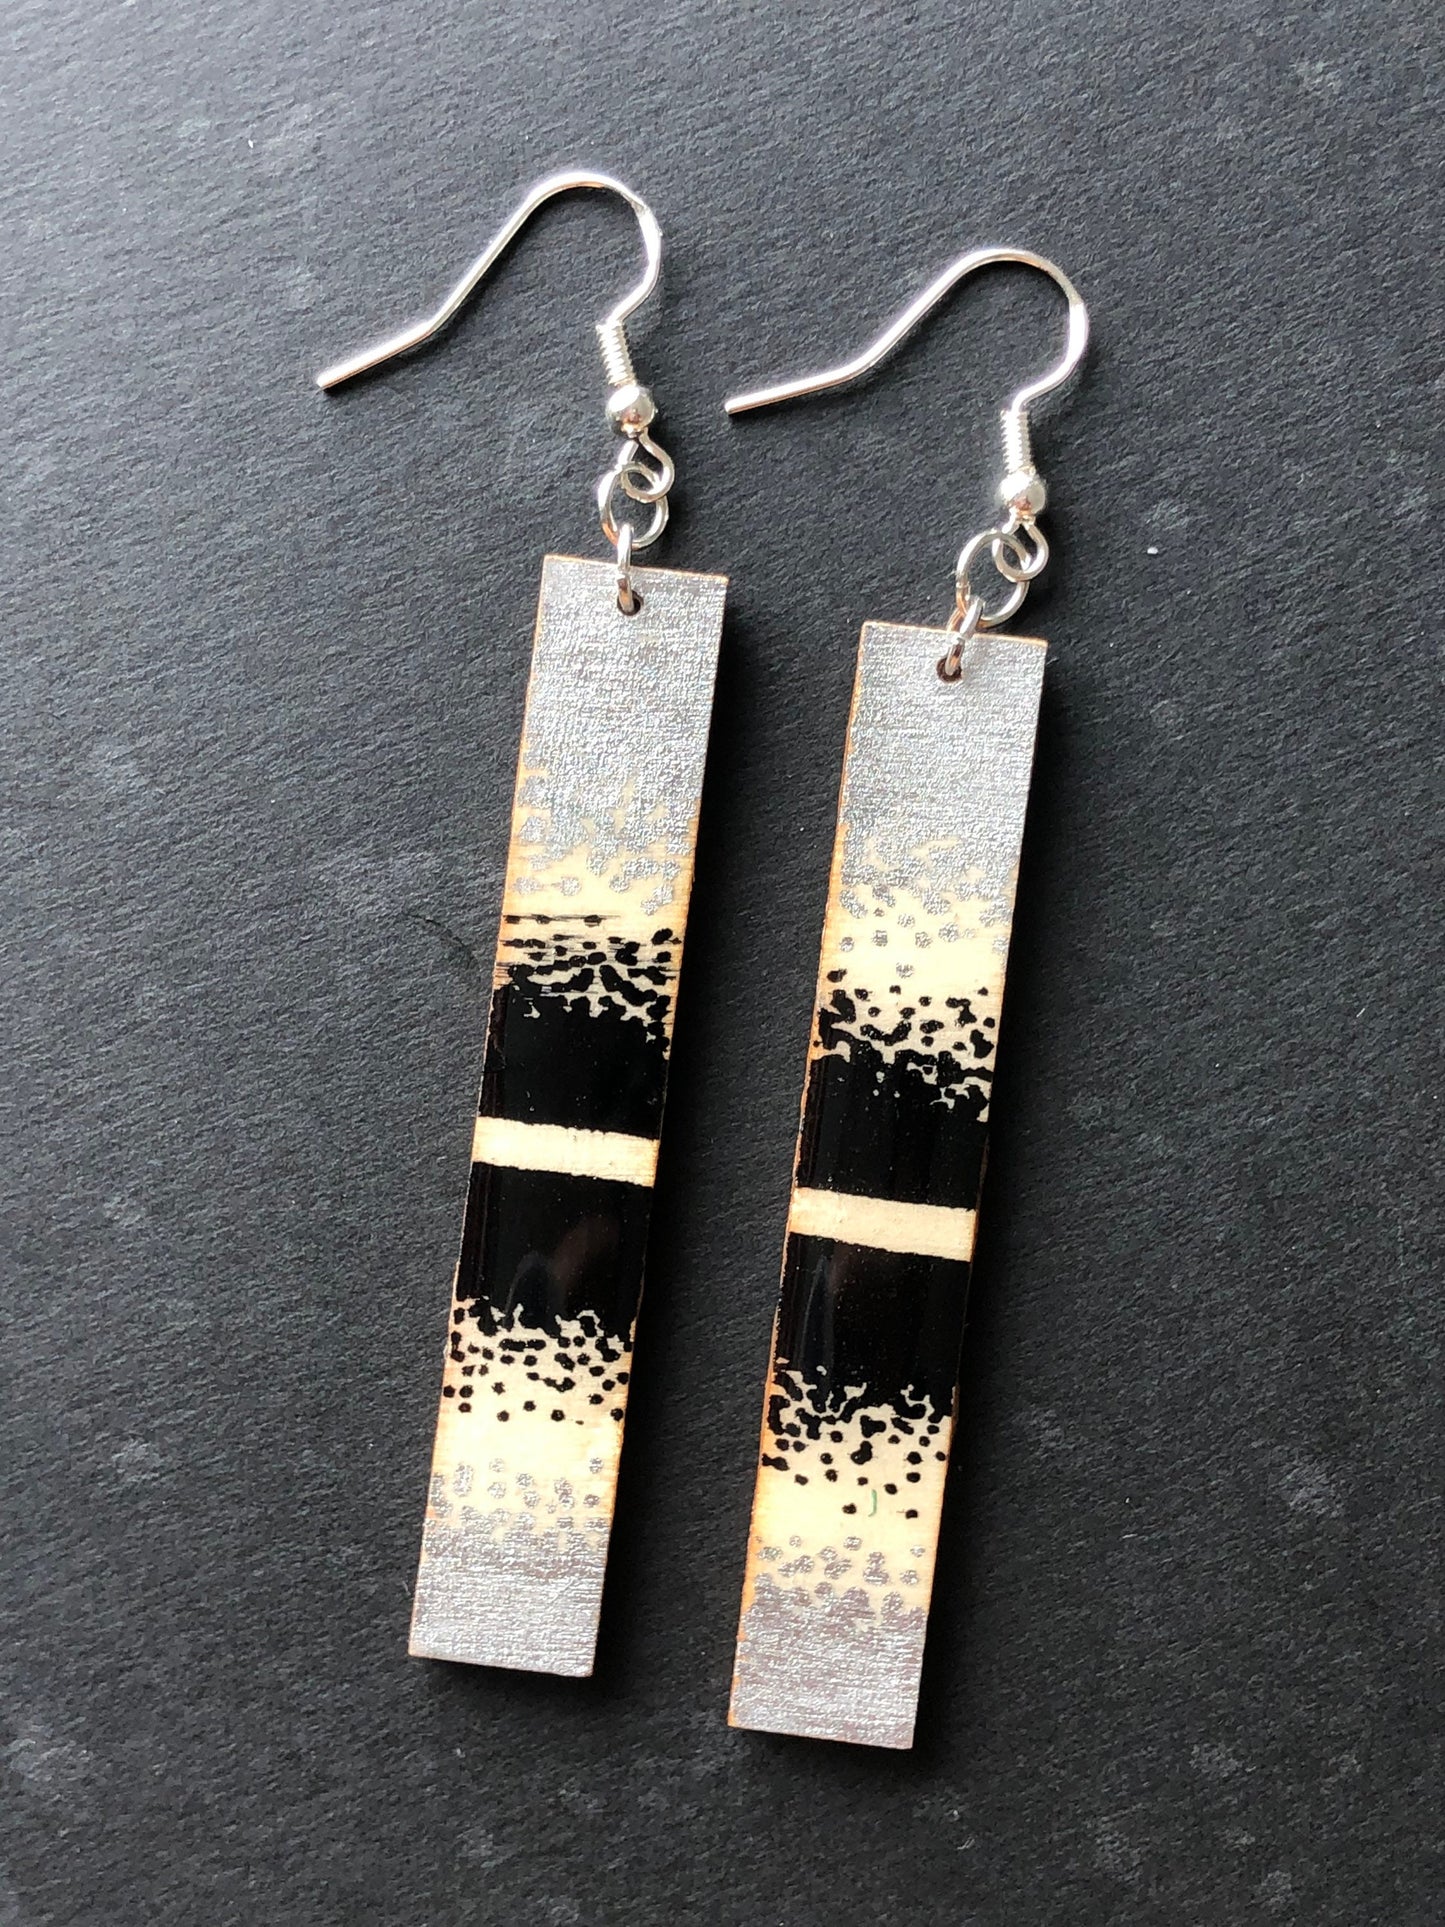 Watercolor Affirmation Earring Dangle - Hand painted on Wood - Silver Hook